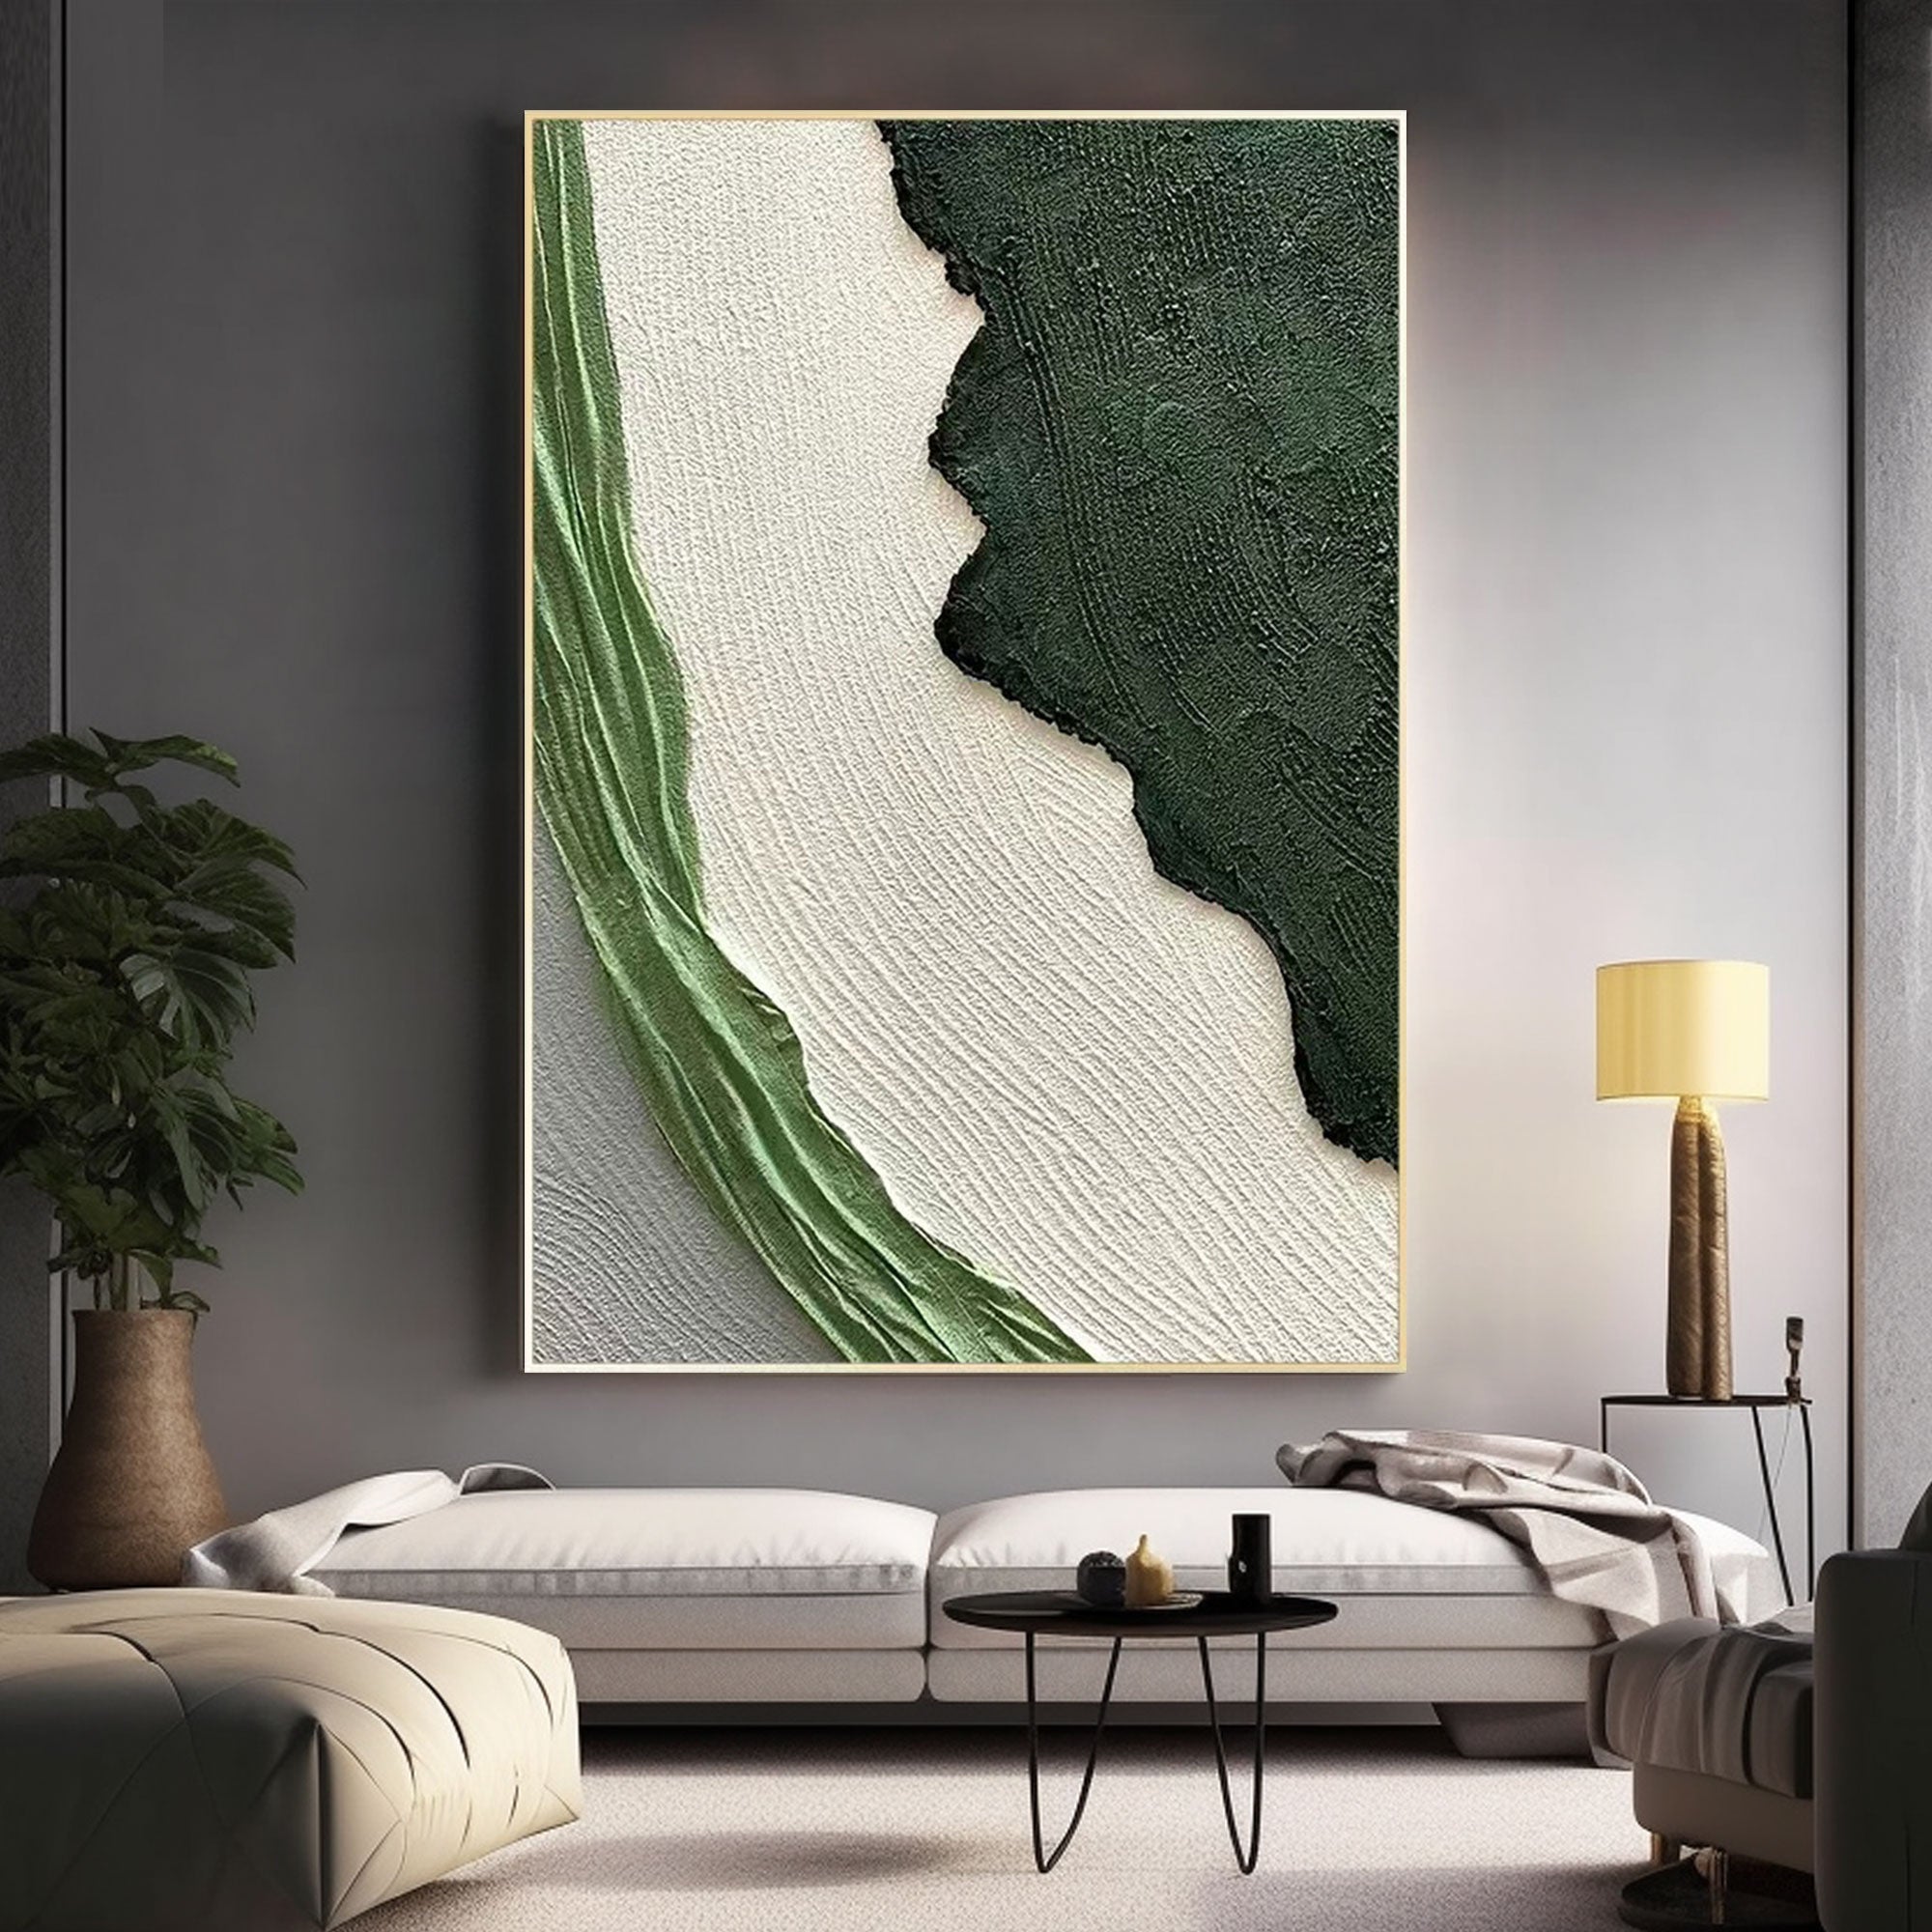 3D Textured Colorful Wall Art Painting  "Whispers of the Verdant Breeze"